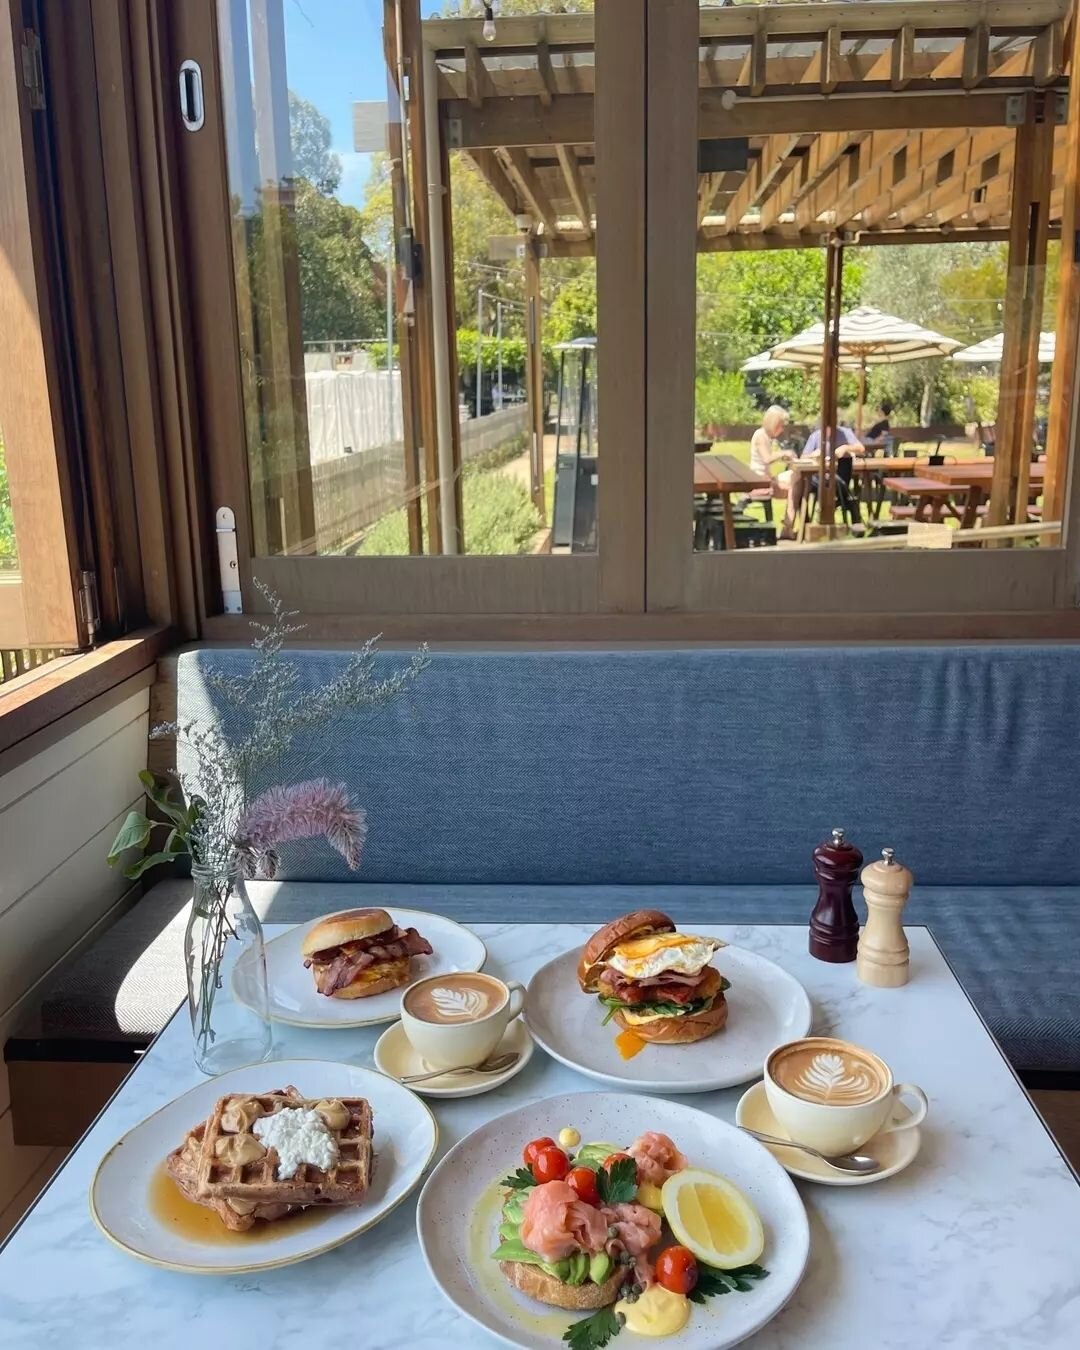 Breakfast views in the #Innerwest&nbsp;🍳
Farm Cafe is open for Breakfast daily, sit in the Dining Room, on The Yard, or by @pocketcityfarms.
Cook-to-order Breakfast Menu available from Wed-Sunday.

⭐Salmon &amp; Avo Smash
⭐Protein Waffle&nbsp;
⭐Brek